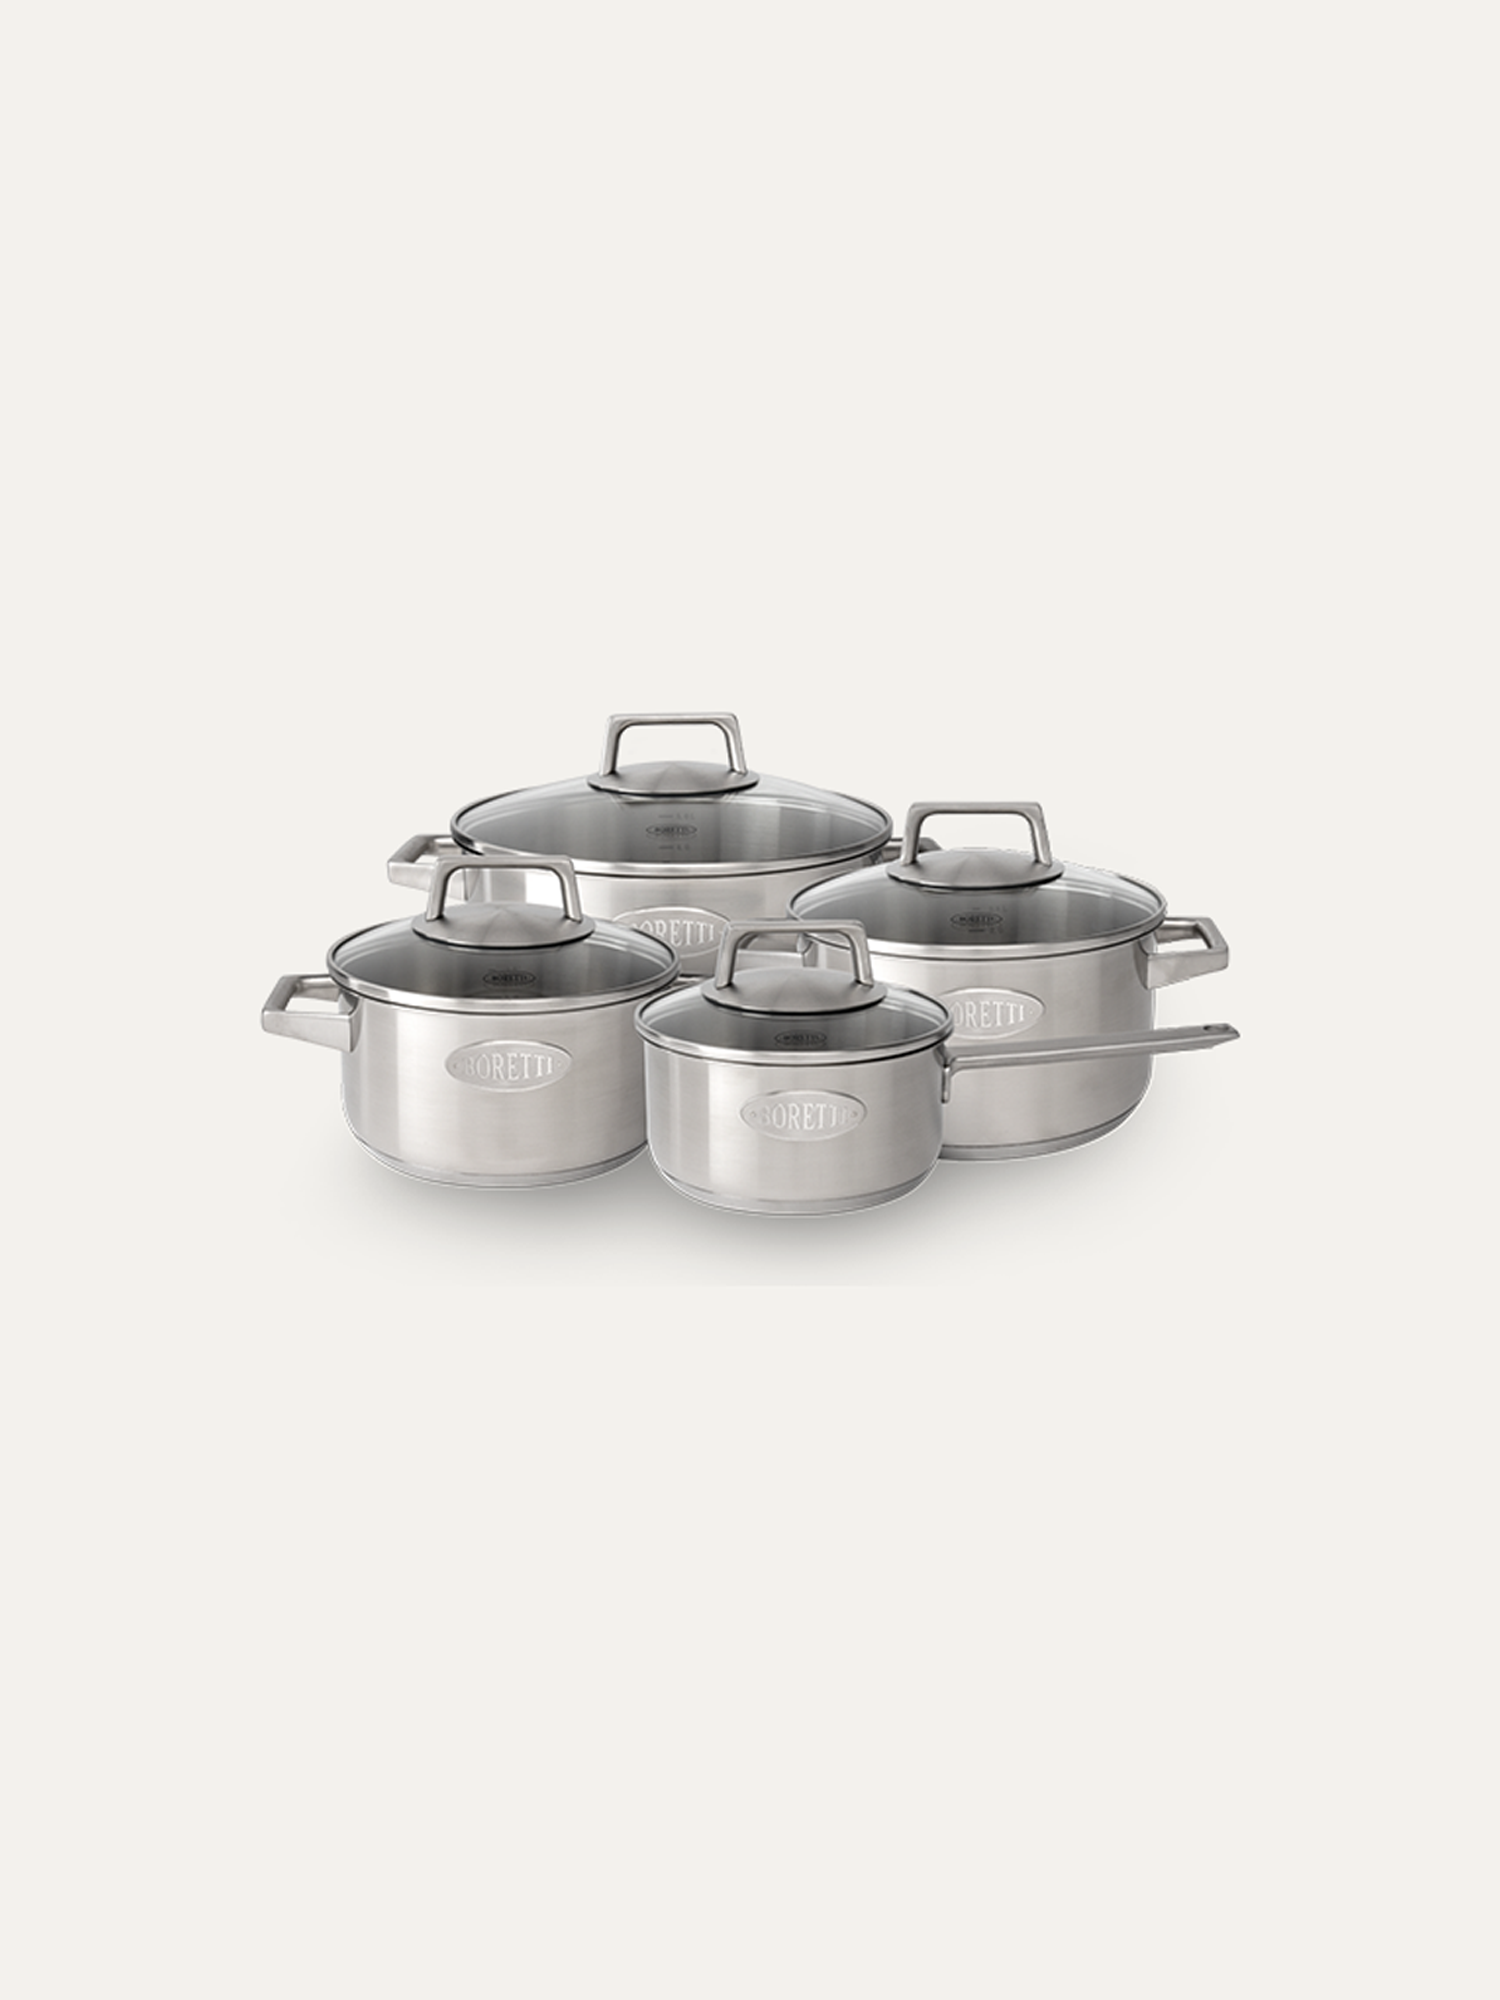 The Pentola 4-piece pan set is a welcome addition to any kitchen.